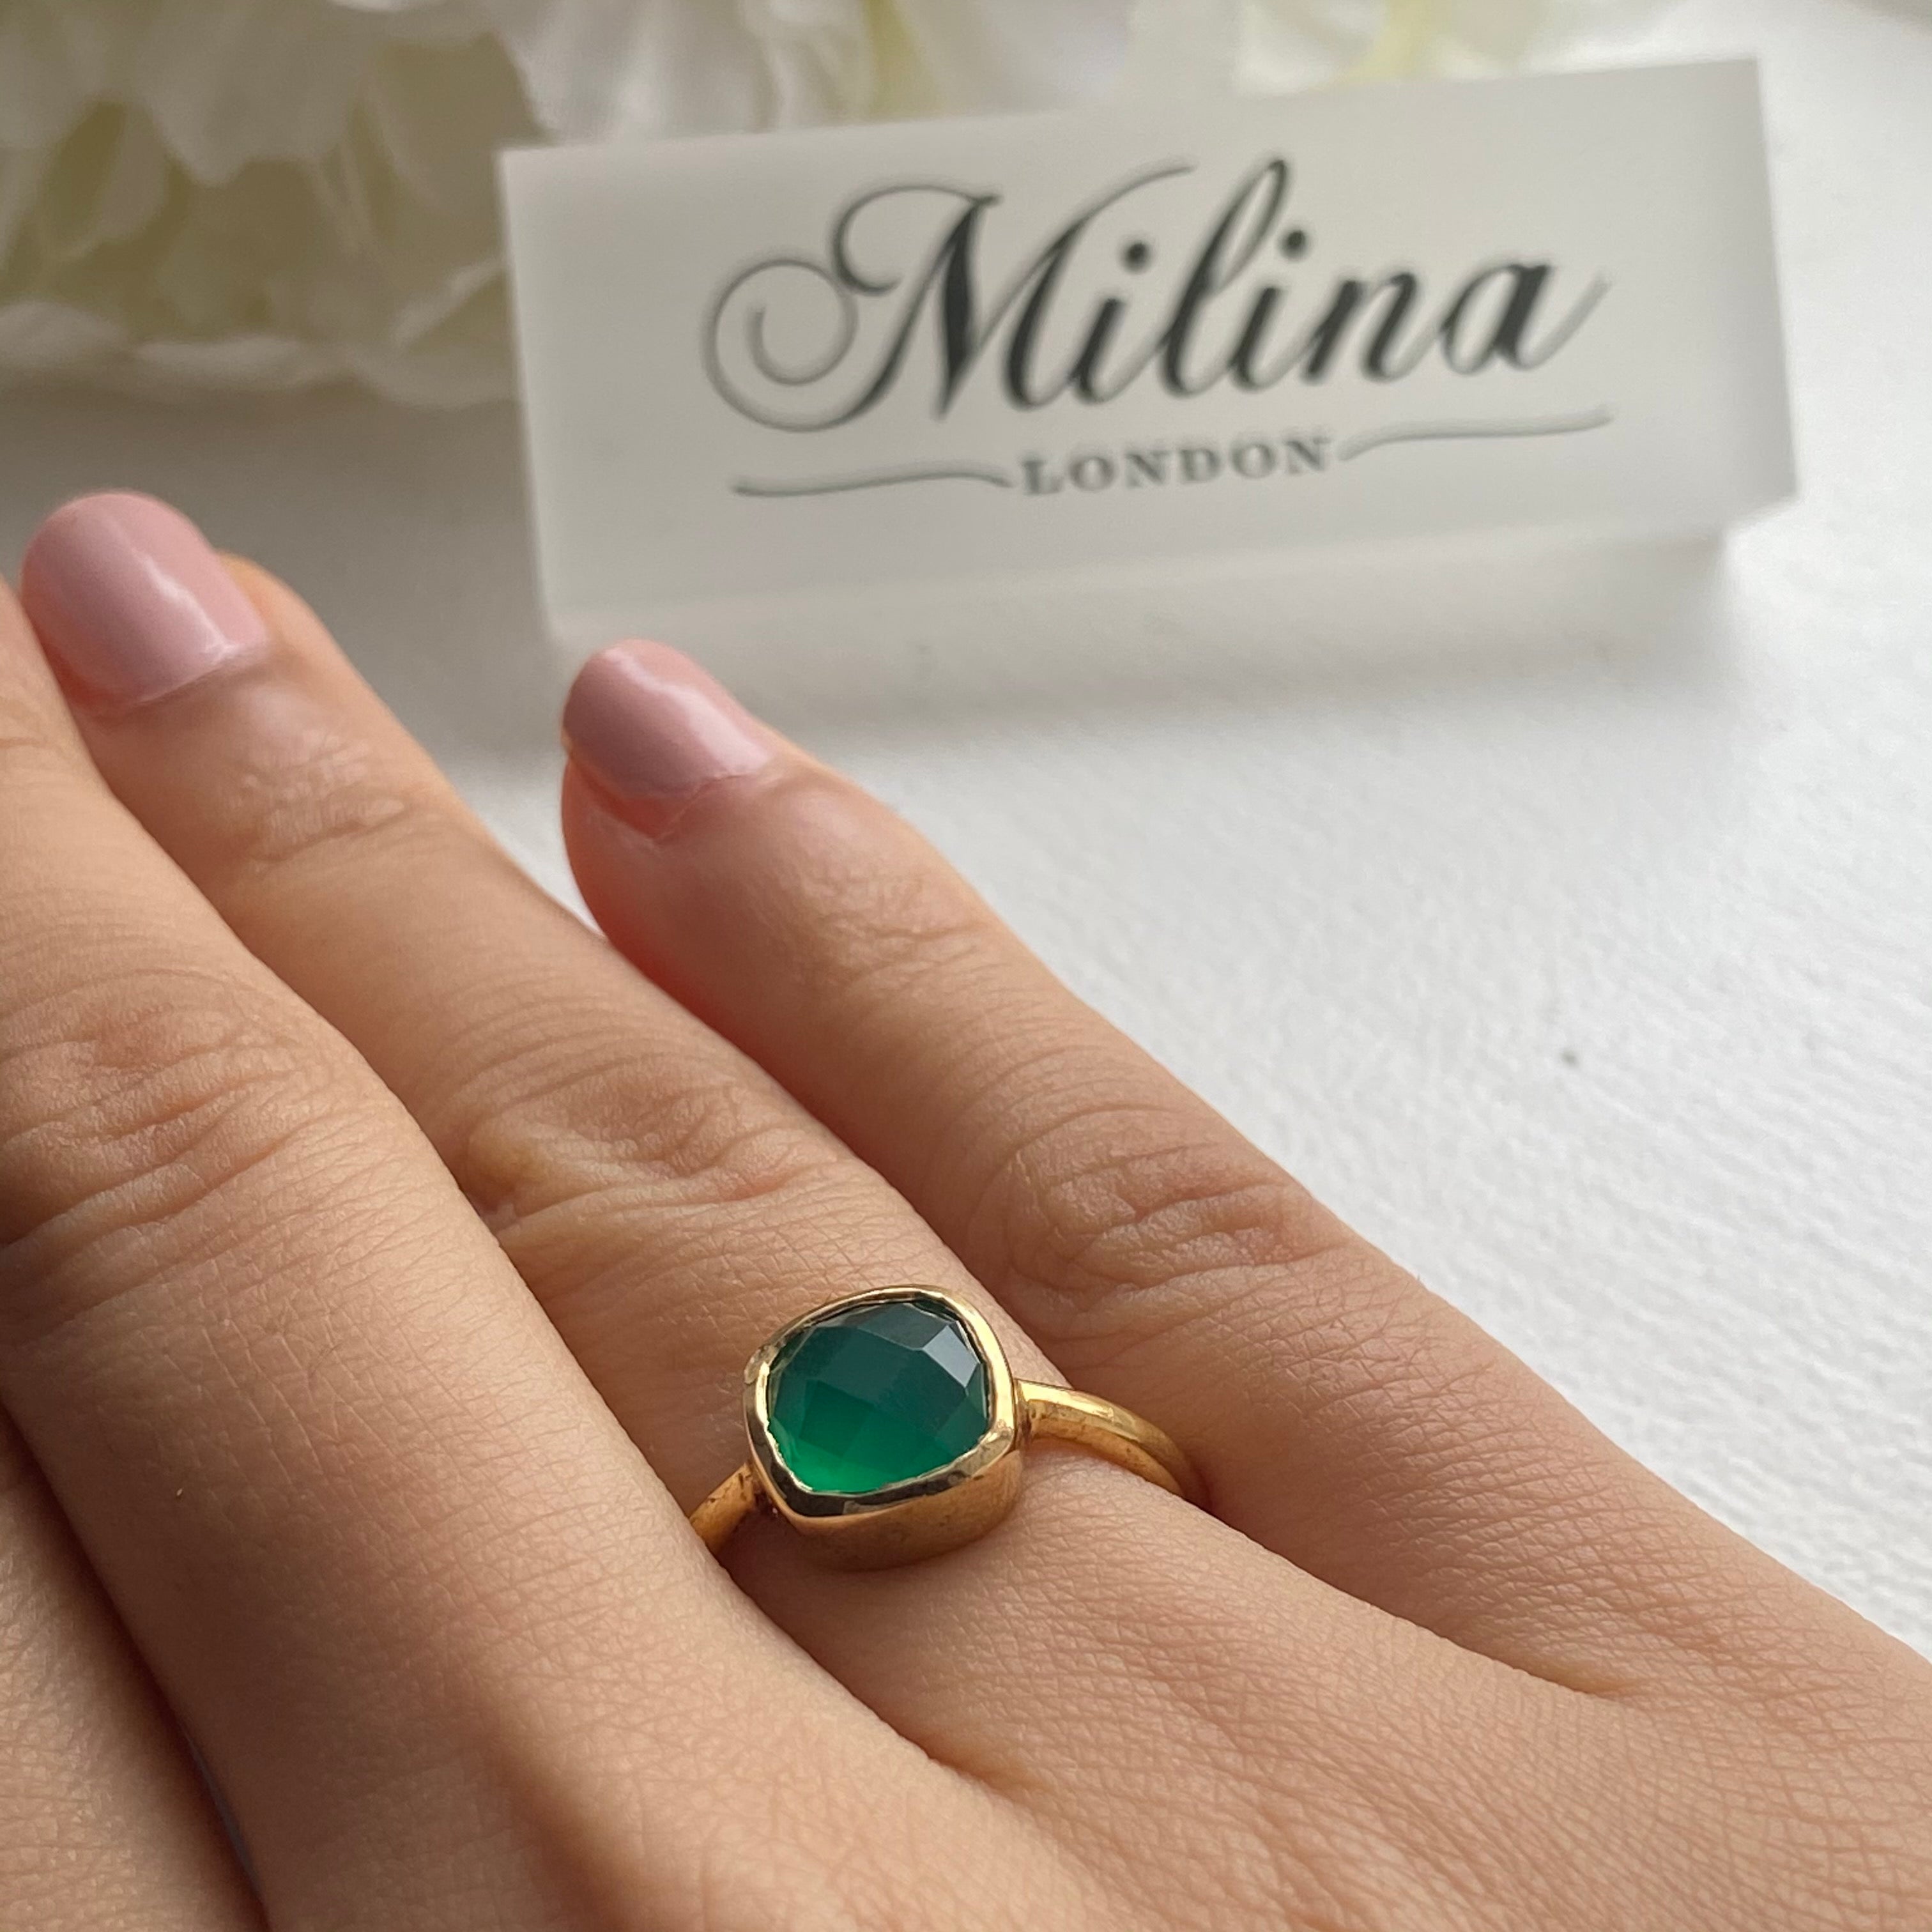 Faceted Square Cut Natural Gemstone Gold Plated Sterling Silver Solitaire Ring - Green Onyx